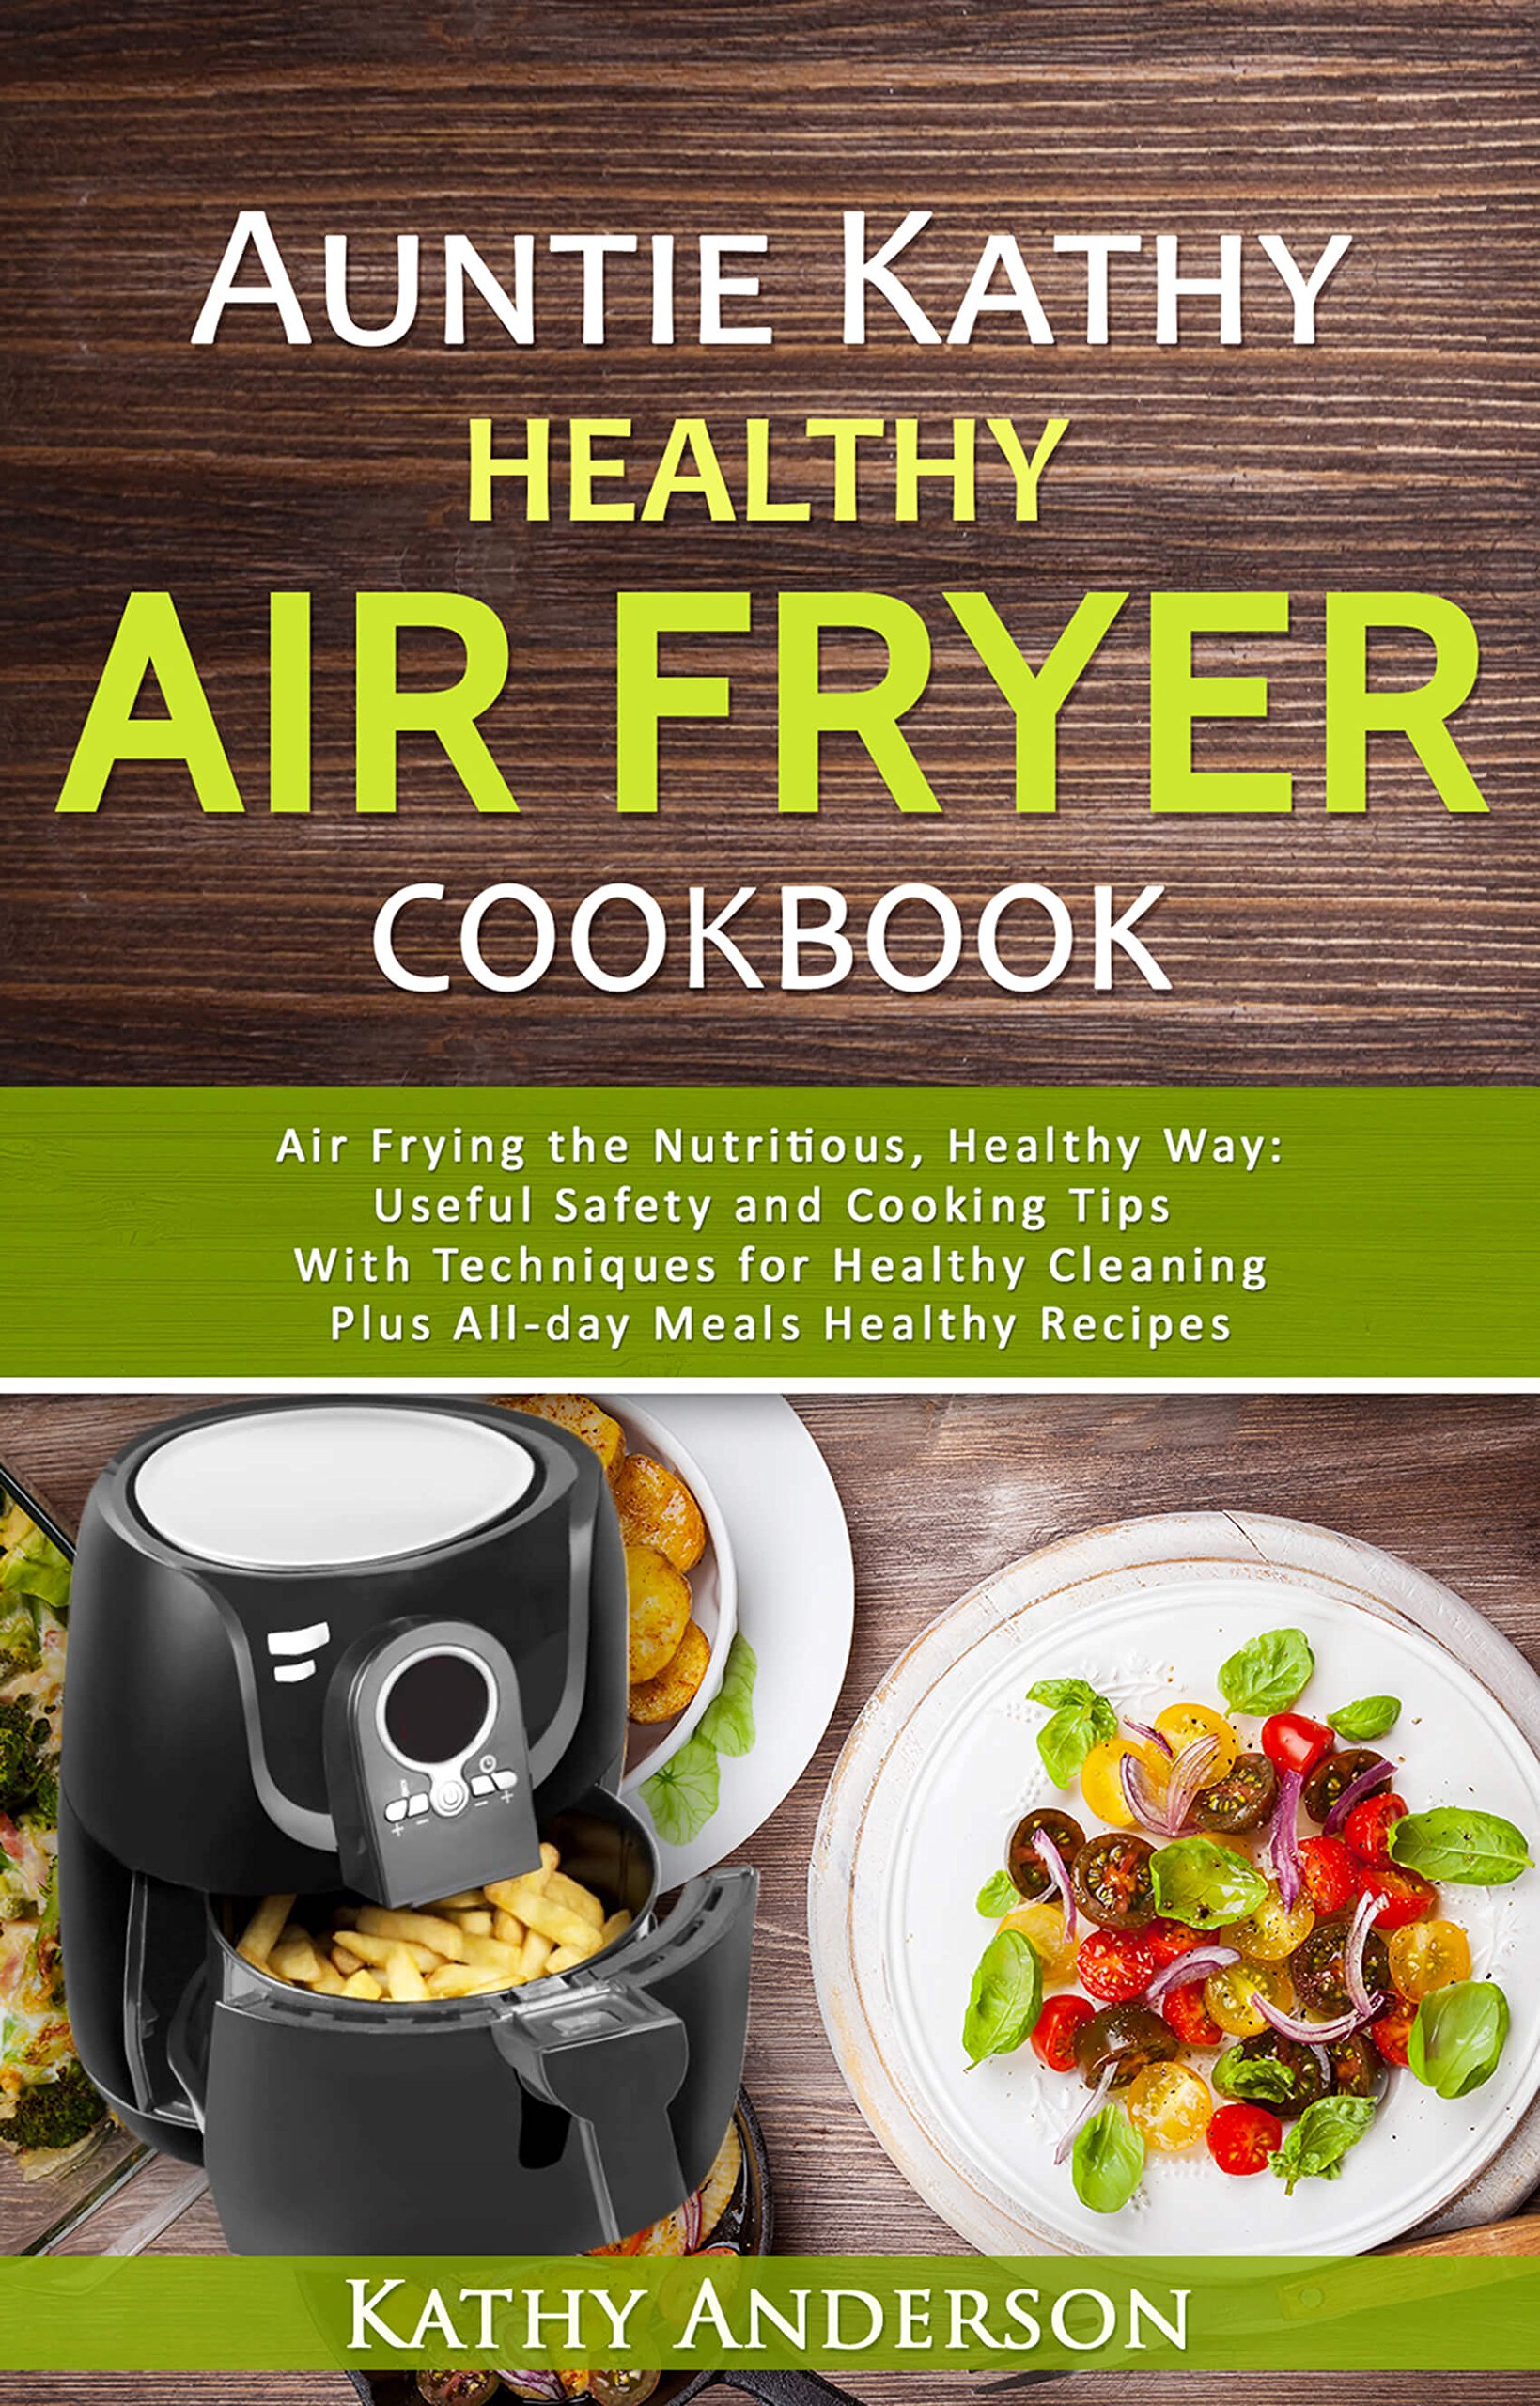 Auntie Kathy Healthy Air Fryer Cookbook: Air Frying the Nutritious, Healthy Way:Useful, Safety and Cooking Tips With Techniques for Healthy Cleaning Plus ... Recipes.The Ultimate healthy air fryer